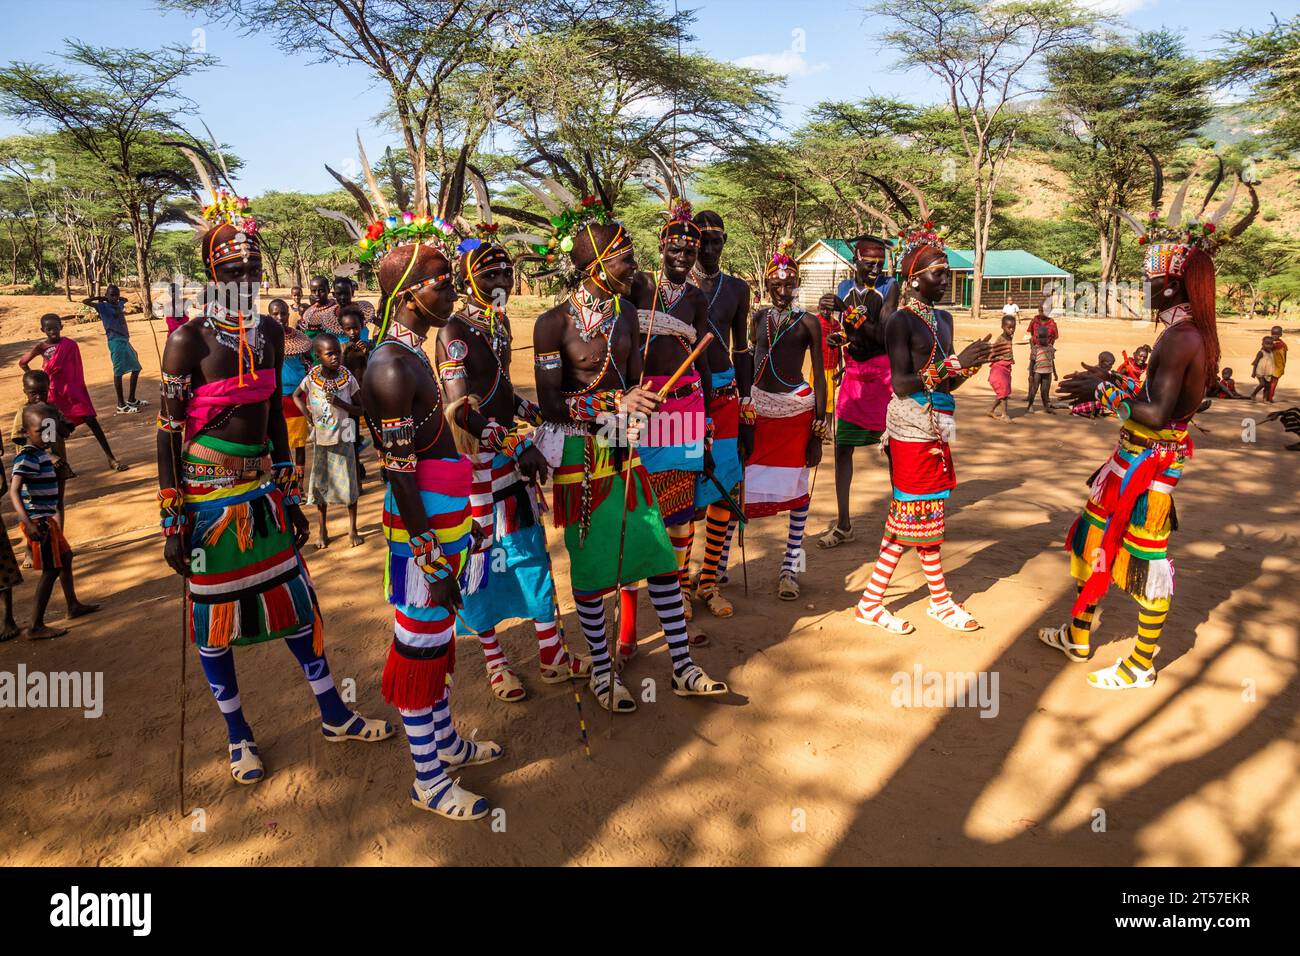 SOUTH HORR, KENYA - FEBRUARY 12, 2020: Group of Samburu tribe young men dancing wearing colorful headpieces made of ostrich feathers after their circu Stock Photo